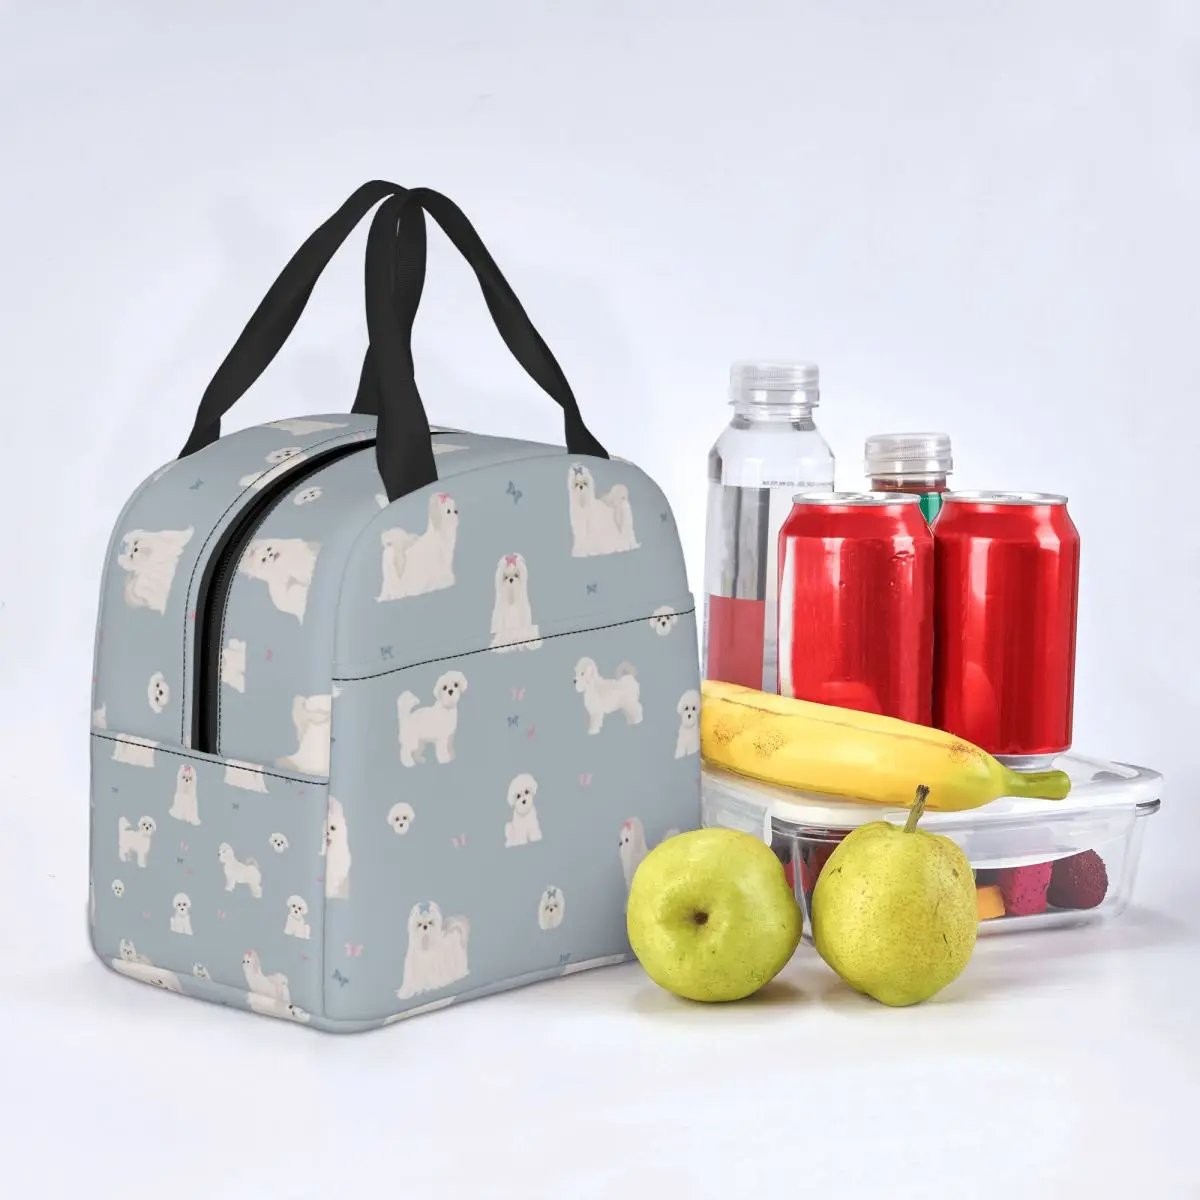 Maltese Dogs Lunch Bags Portable Insulated Oxford Cooler Thermal Picnic Tote for Women Girl